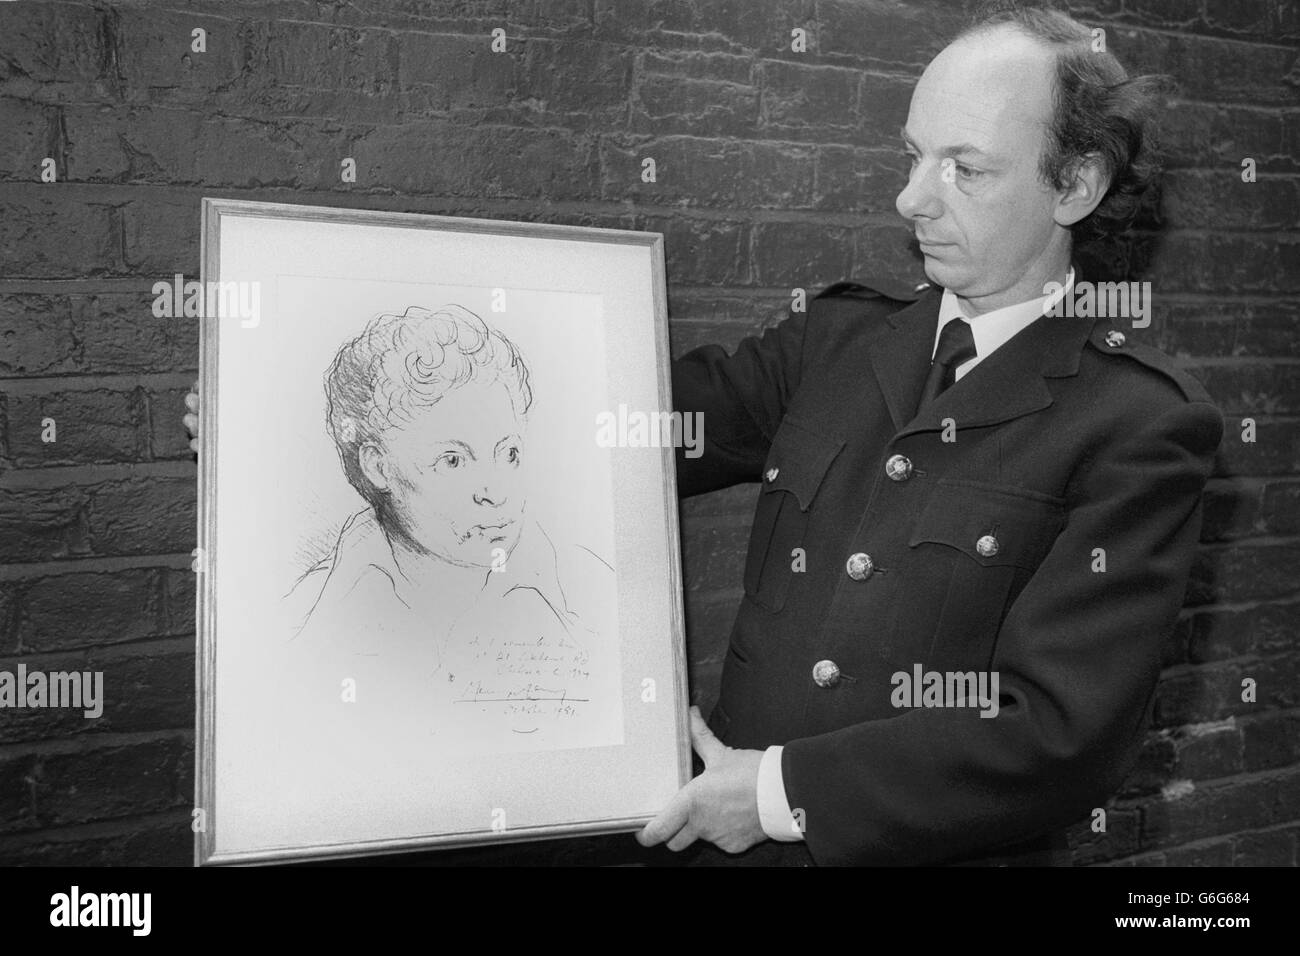 An usher at the Duke of York's Theatre, London, holds Mervyn Levy's portrait of the late Welsh poet Dylan Thomas. It is due to be auctioned at the theatre by Sir Huw Wheldon during the Dylan Thomas Celebration Concert to raise funds for the installation of a plaque to Dylan Thomas in Poets Corner at Westminster Abbey. Stock Photo